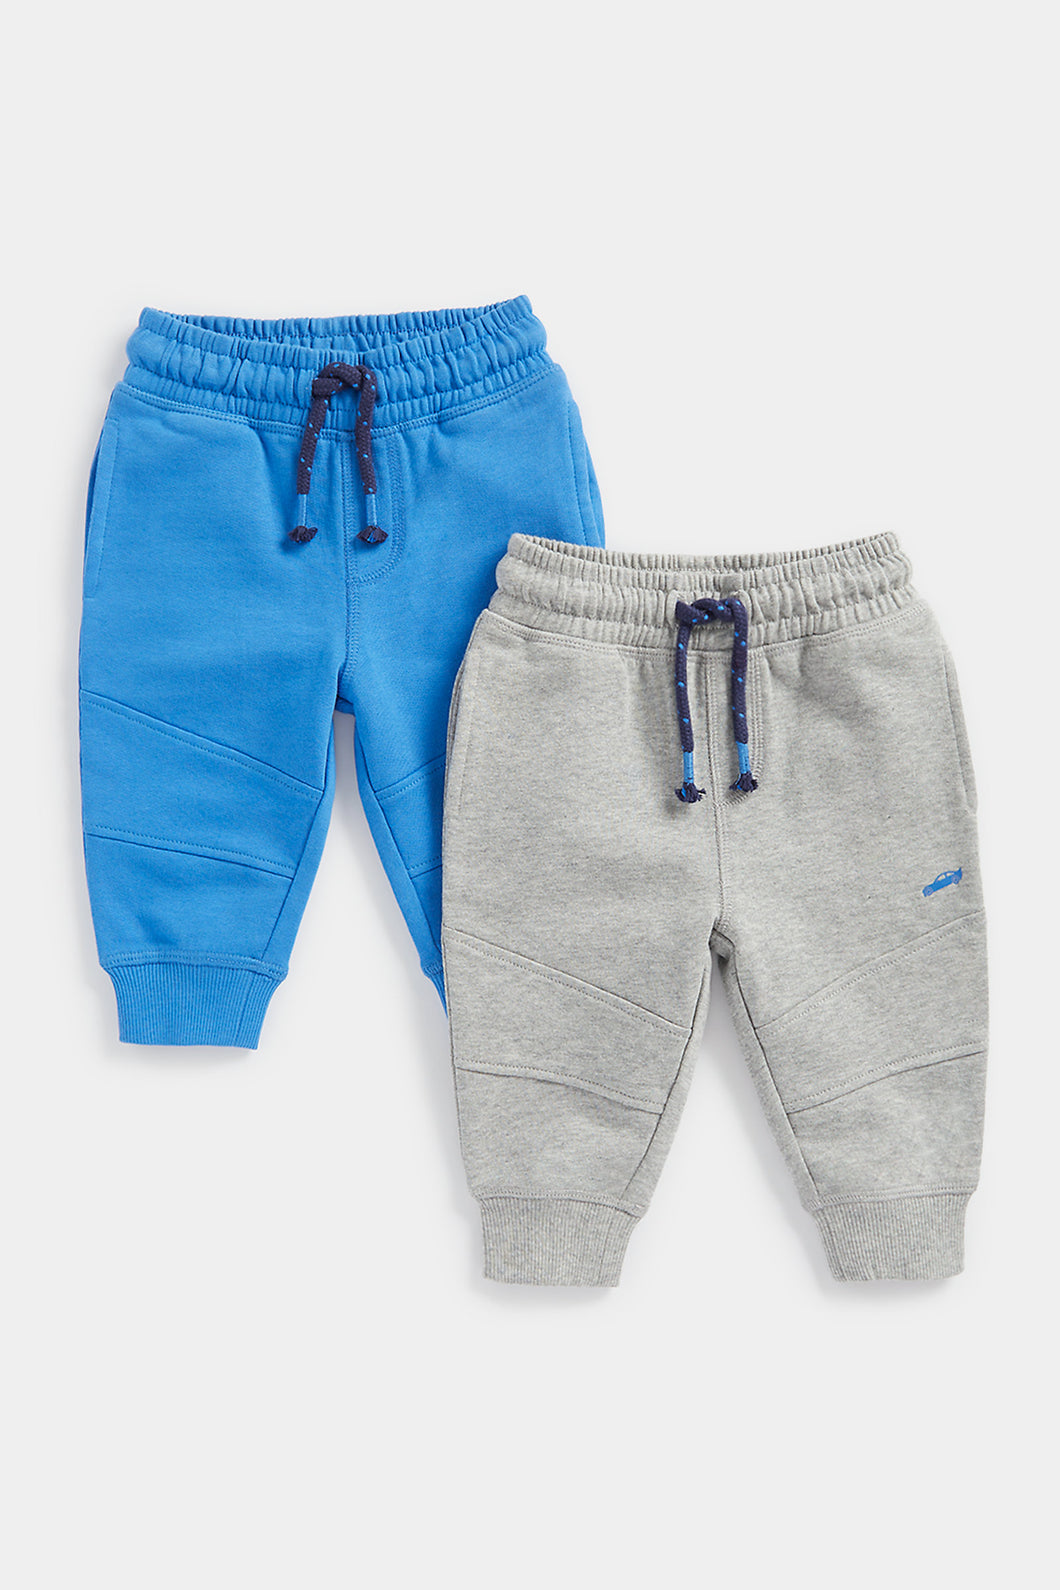 Mothercare Blue and Grey Joggers - 2 Pack